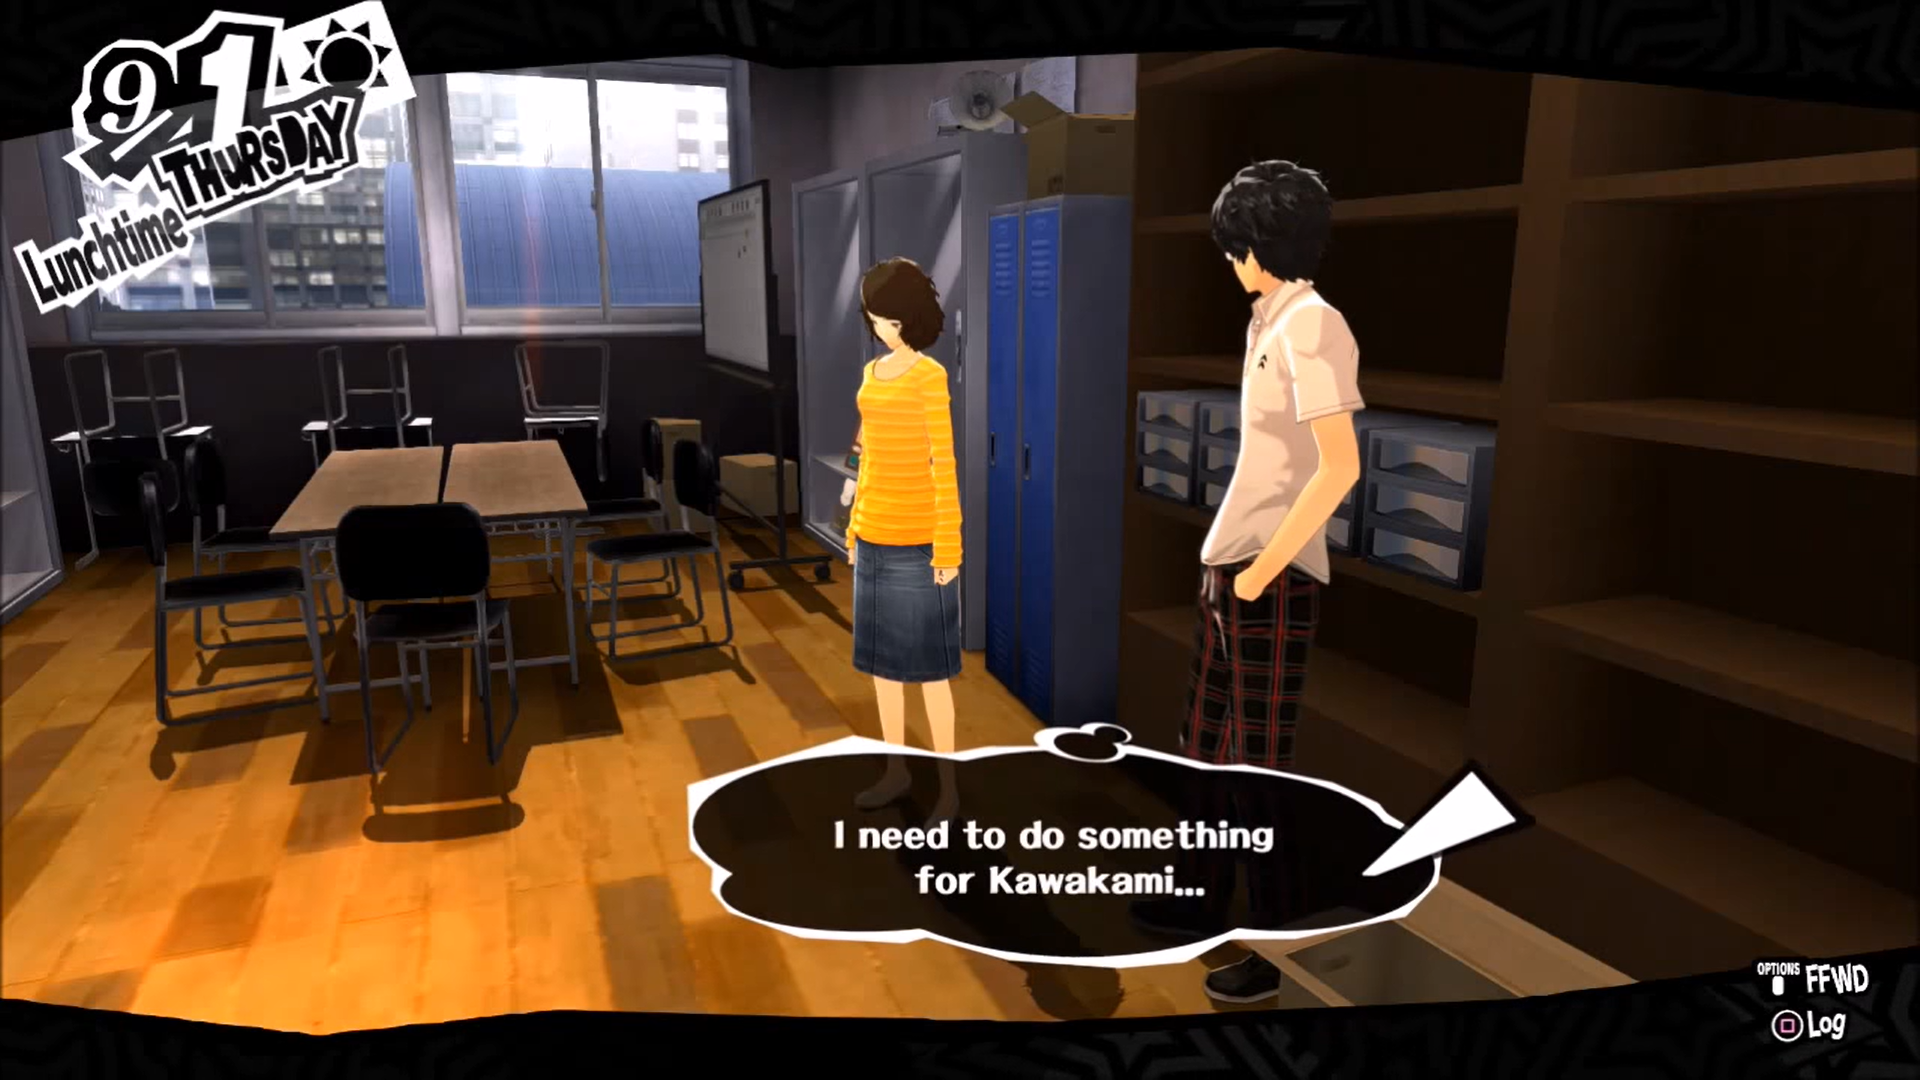 Persona 5's protagonist looks at his teacher, Kawakami. A though bubble from his head says "I need to help Kawakami..."